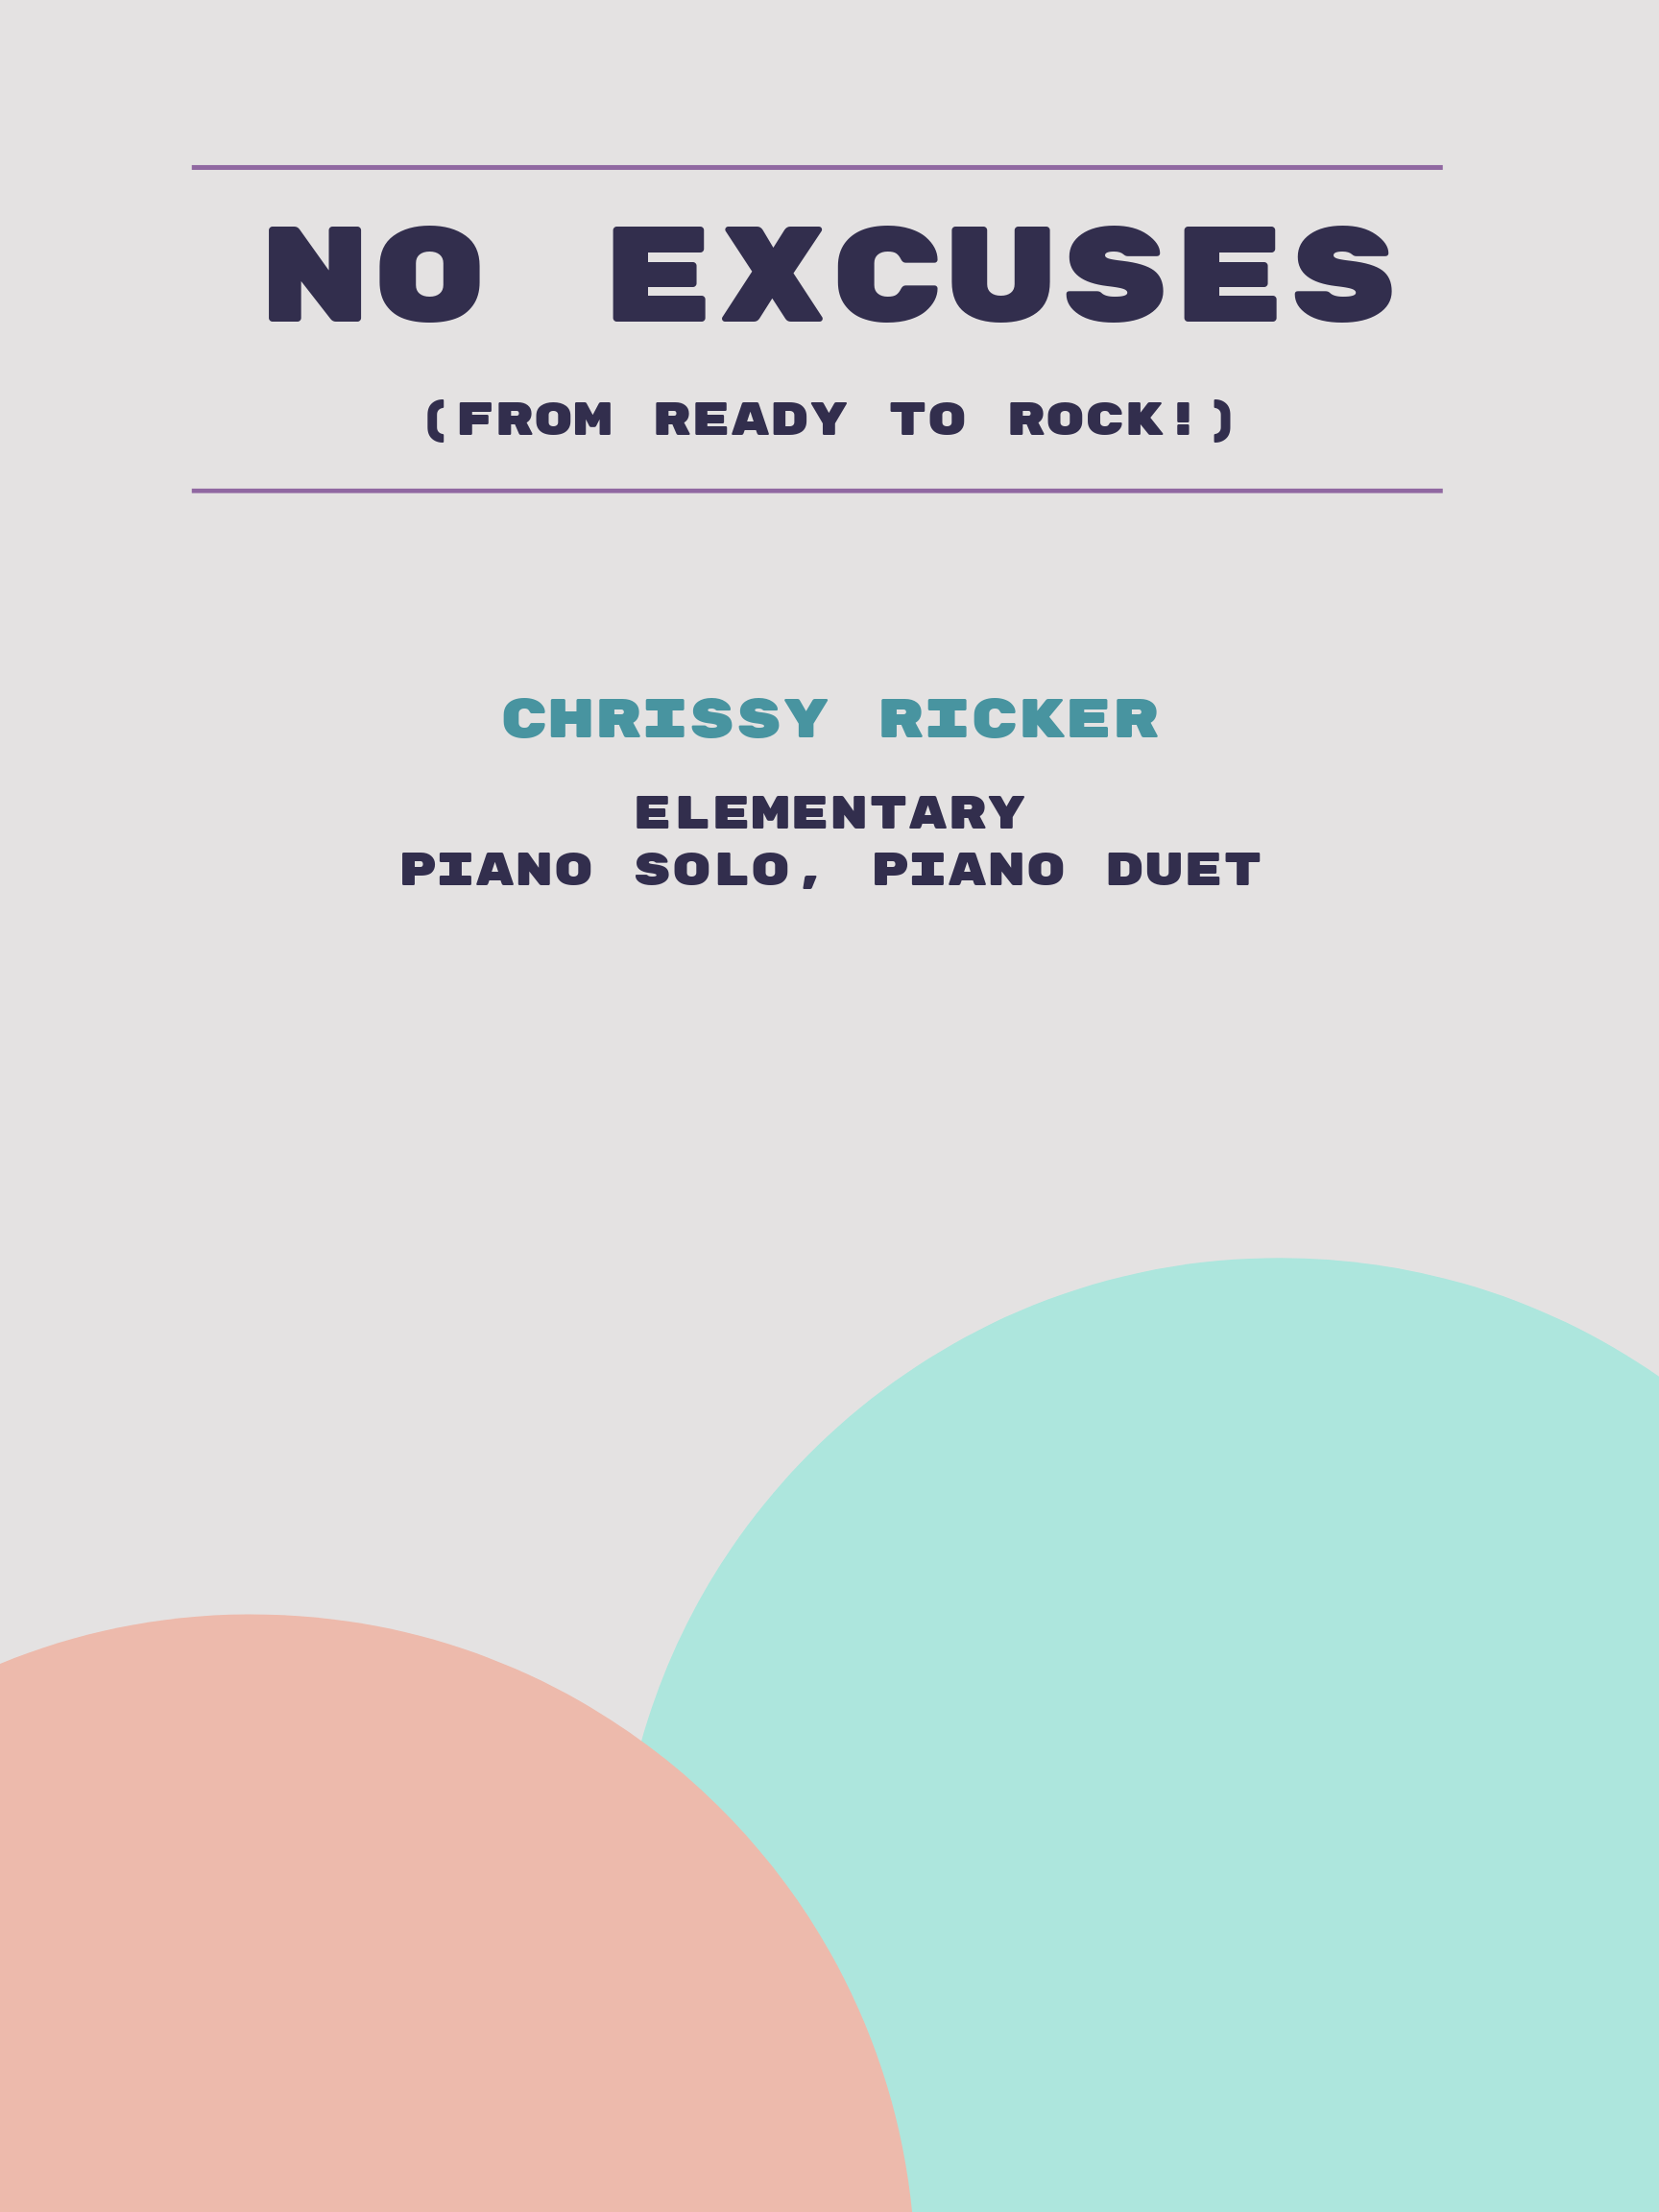 No Excuses by Chrissy Ricker